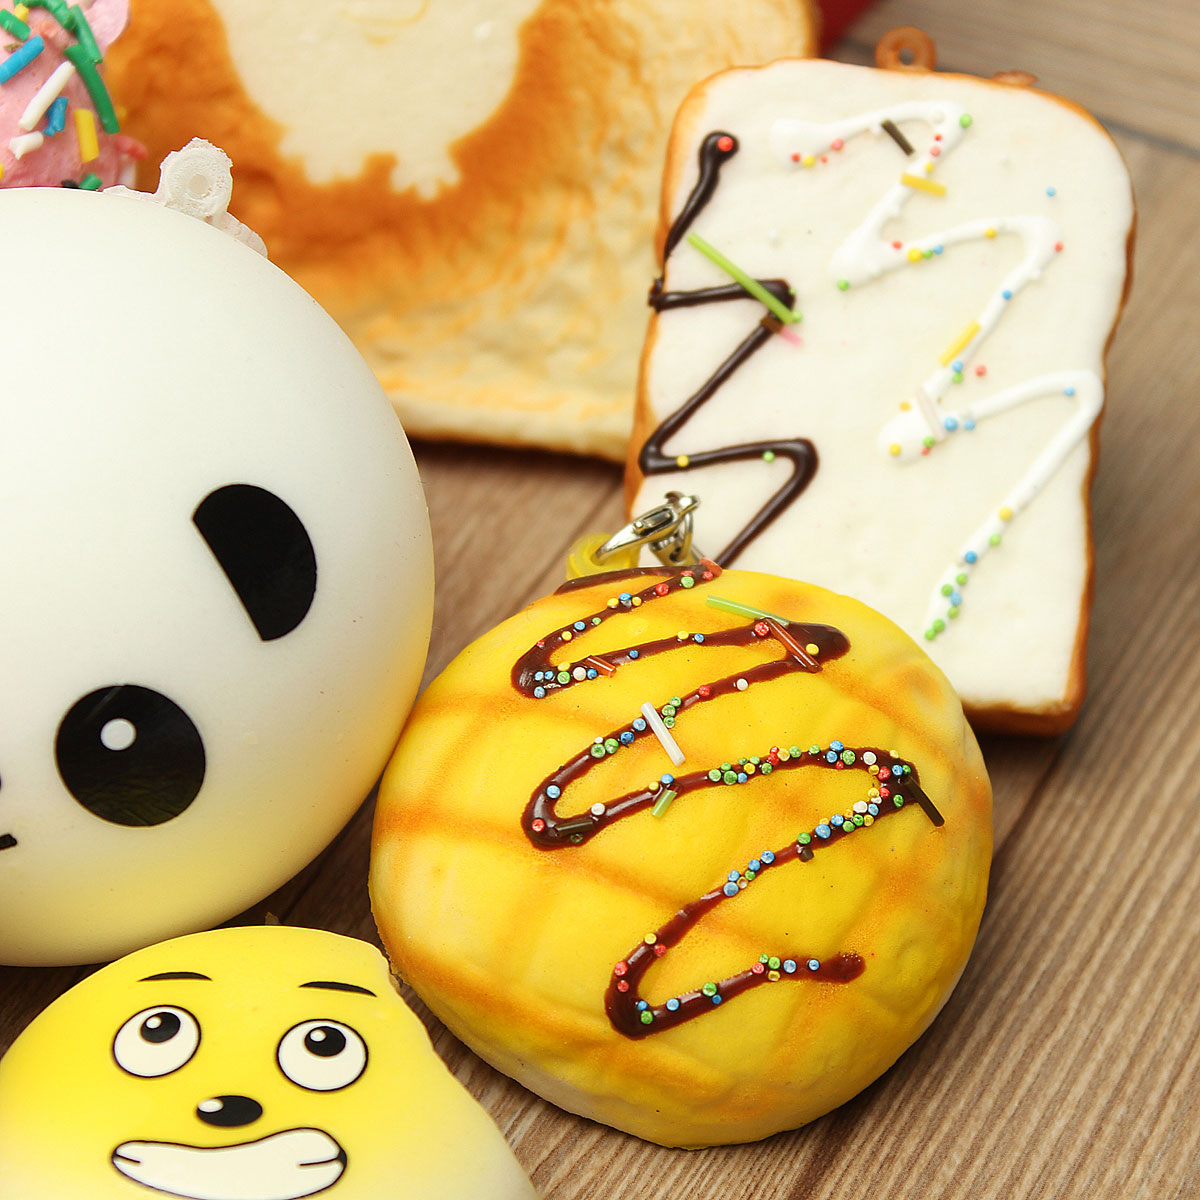 18PCS-Squishy-Christmas-Gift-Decor-Panda-Cup-Cake-Toasts-Buns-Donuts-Random-Soft-Cell-Phone-Straps-1069615-7